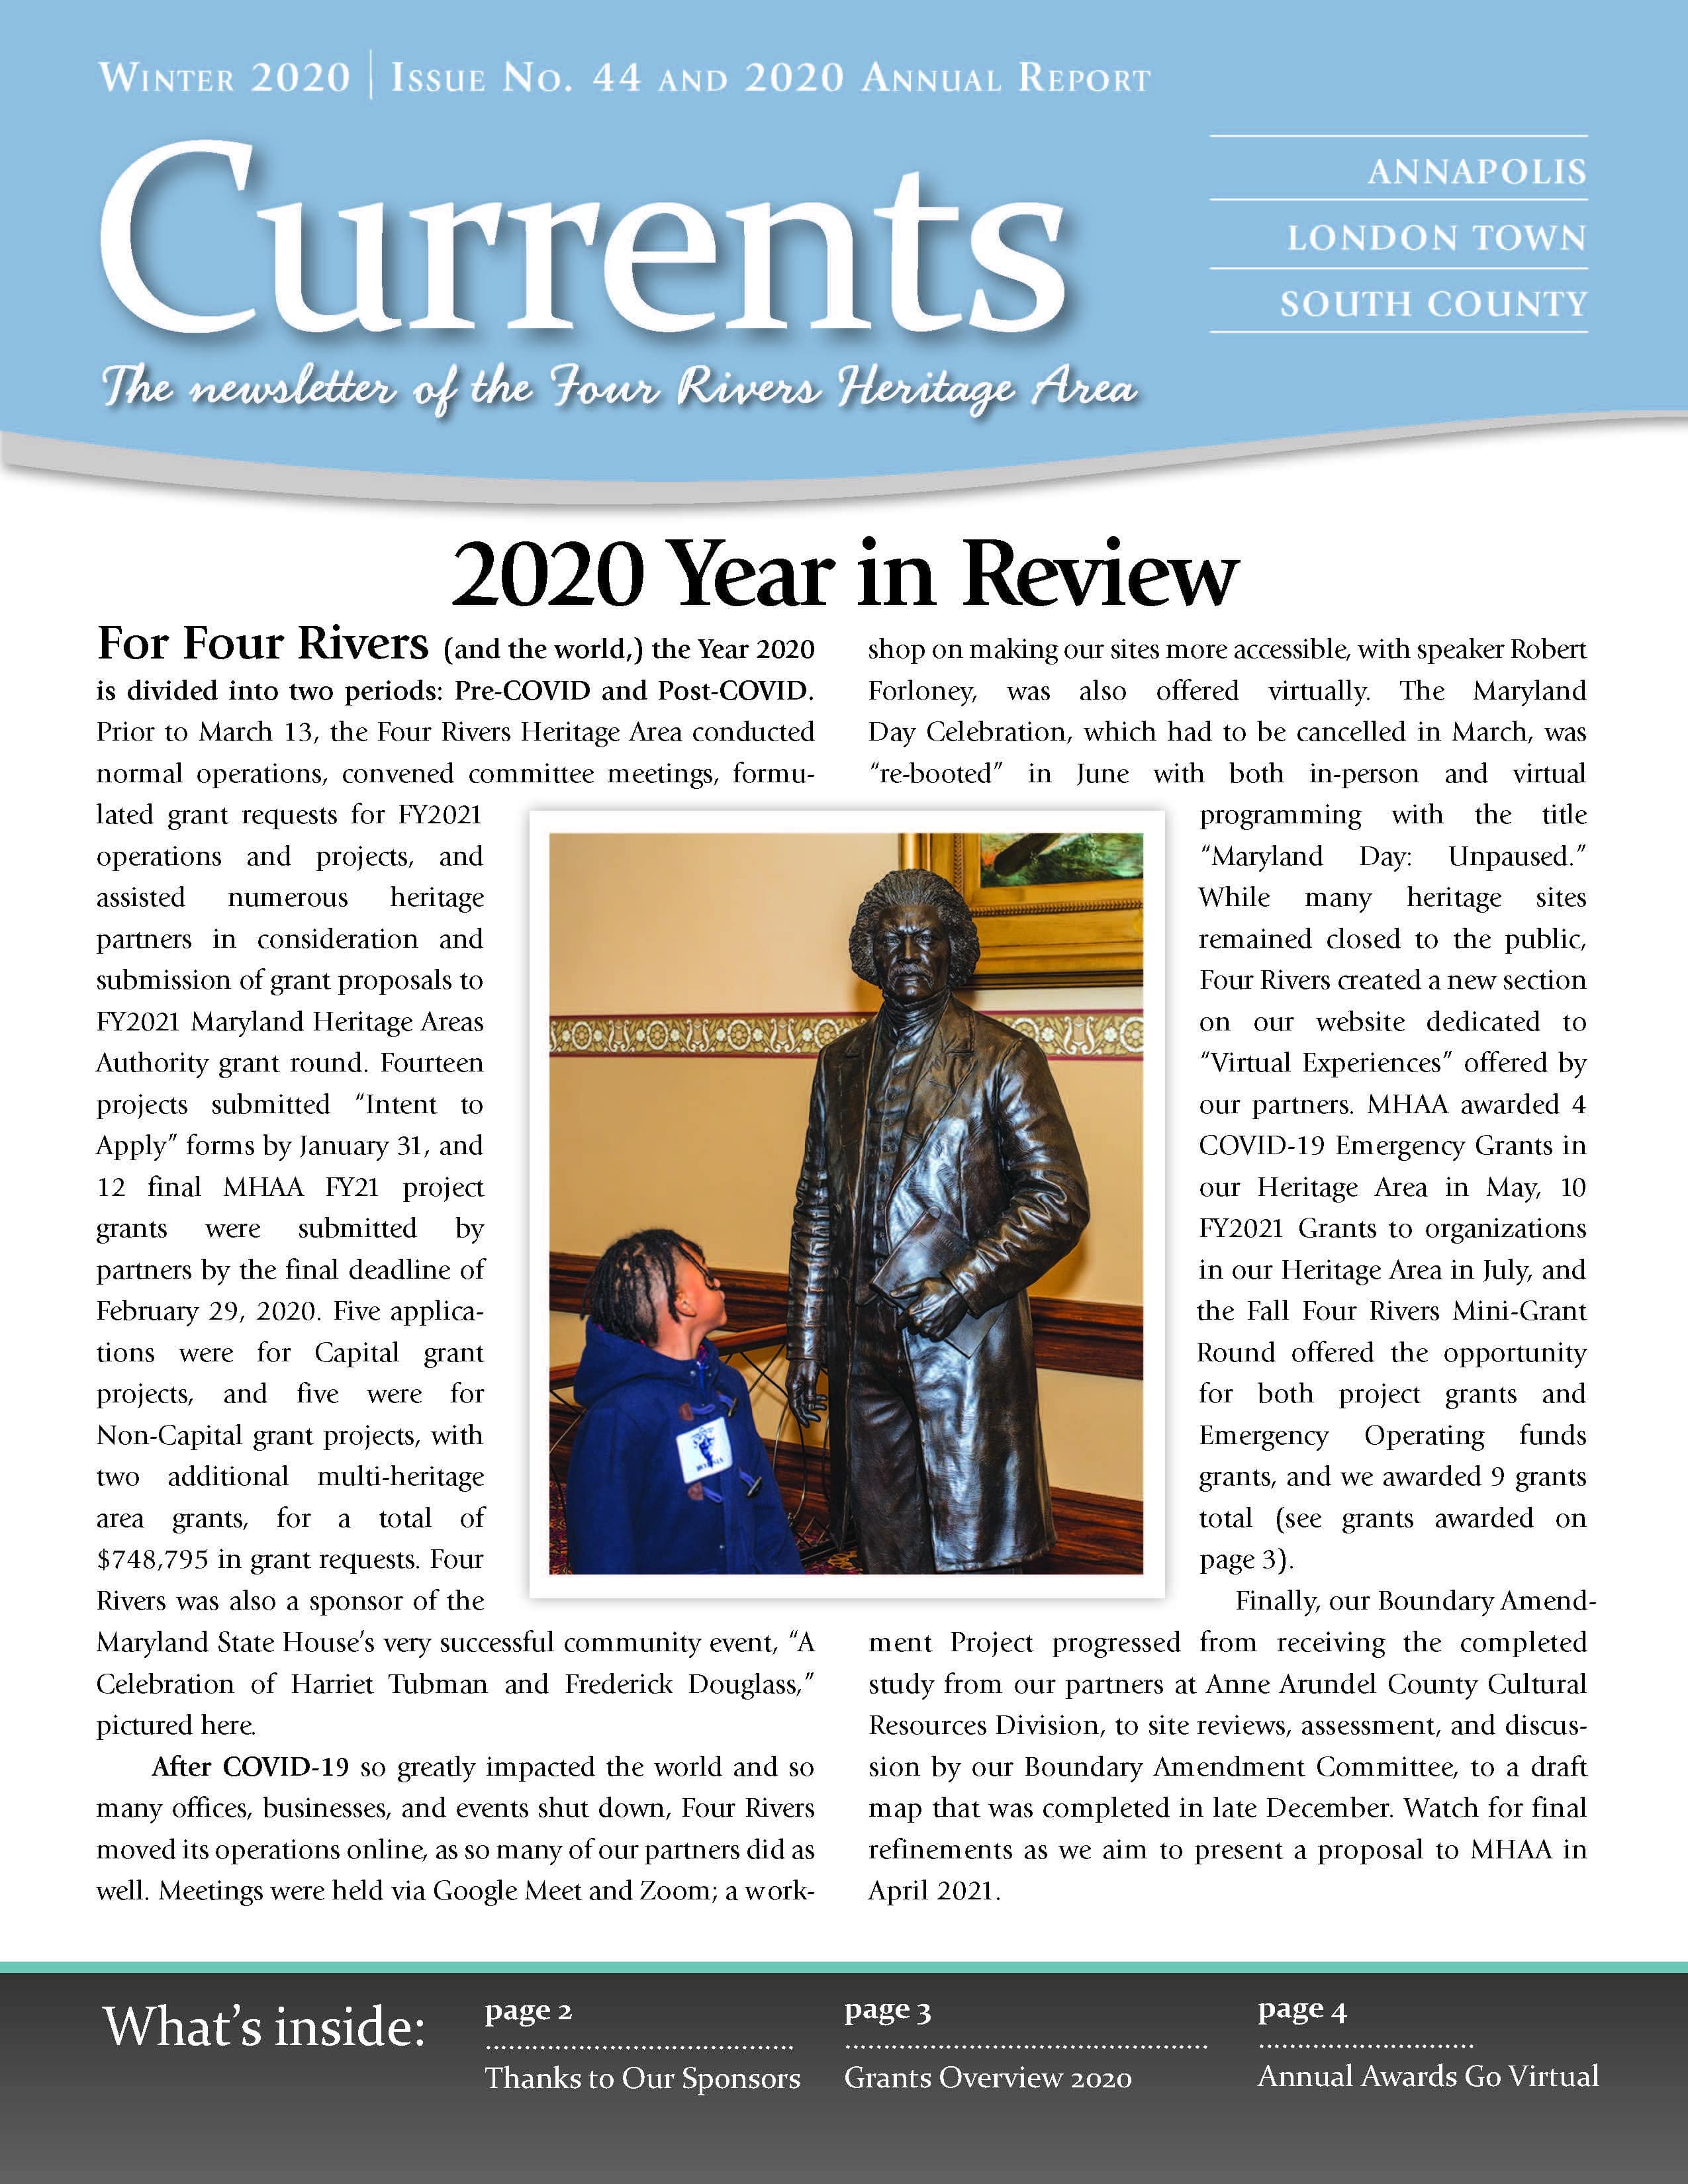 Newsletter 44 and 2020 Annual Report Page 1